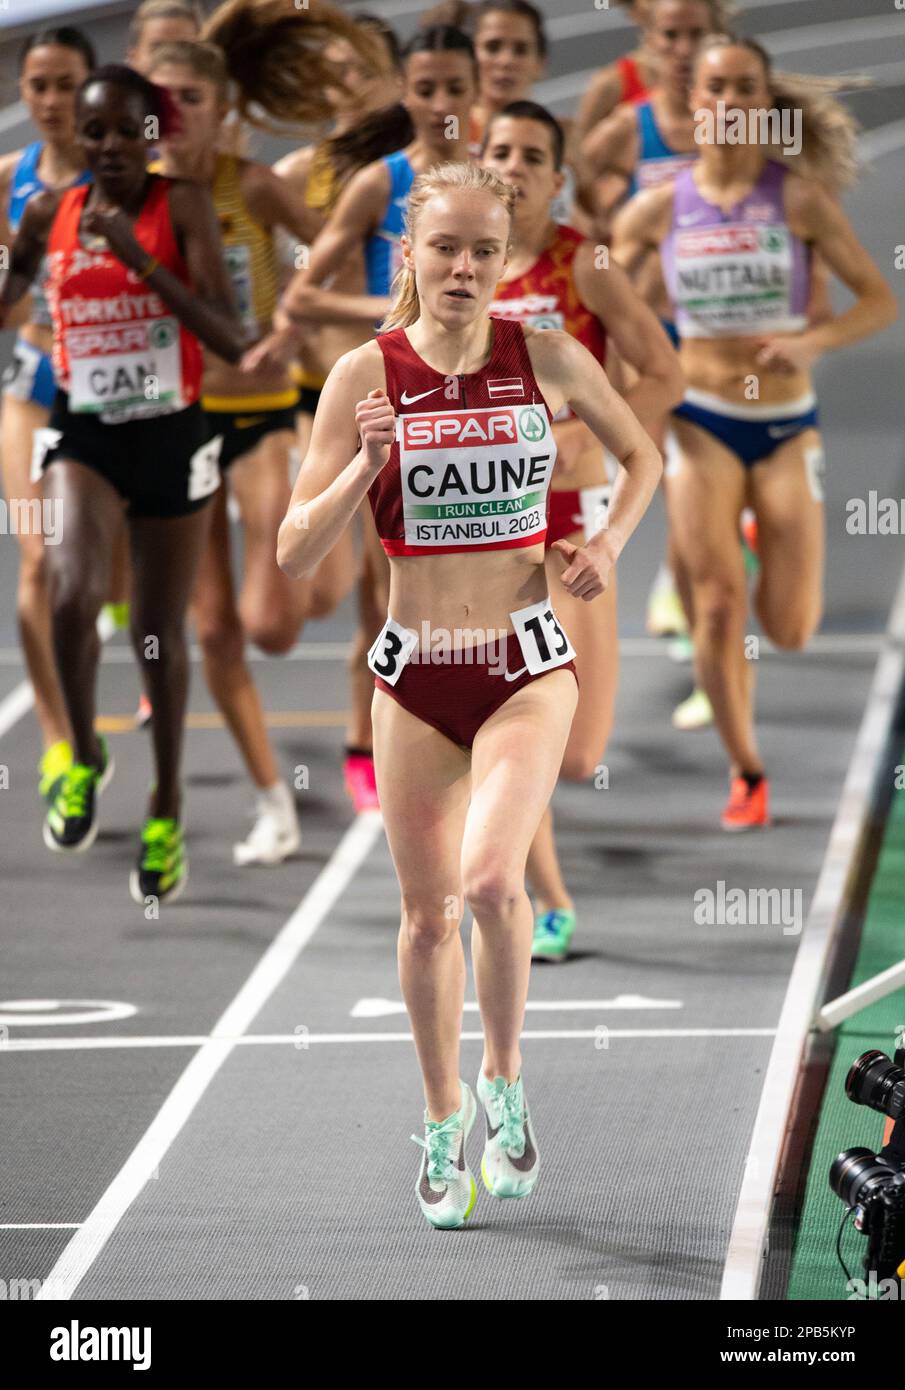 Agate Caune of Latvia competing in the women’s 3000m final on Day 3 of the European Indoor Athletics Championships at Ataköy Athletics Arena in Istanb Stock Photo